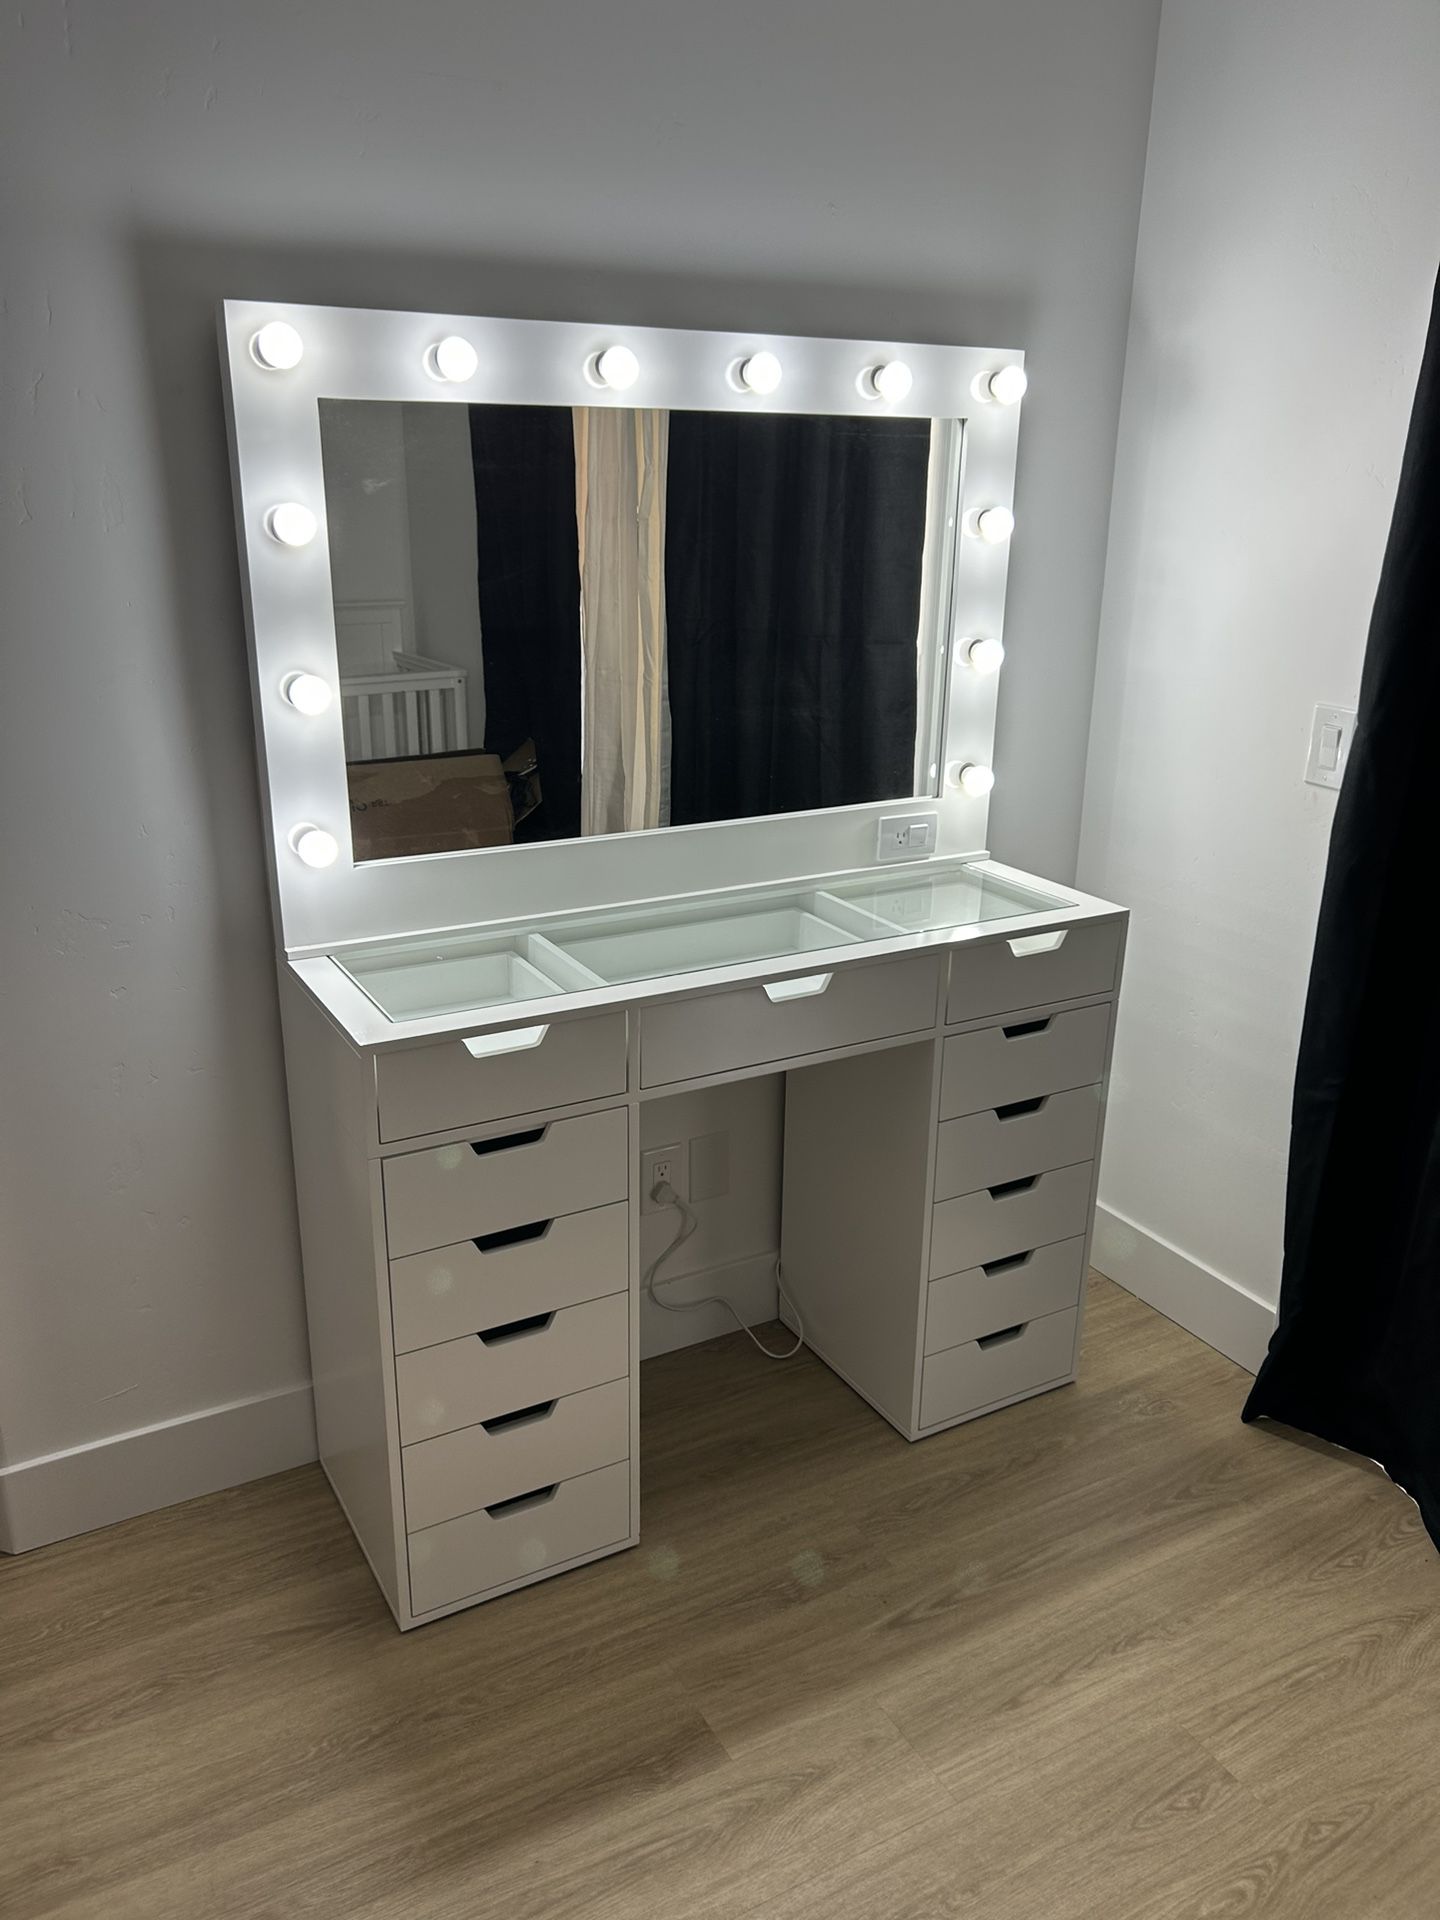 New 48in Vanity With Hollywood Mirror😍❤️